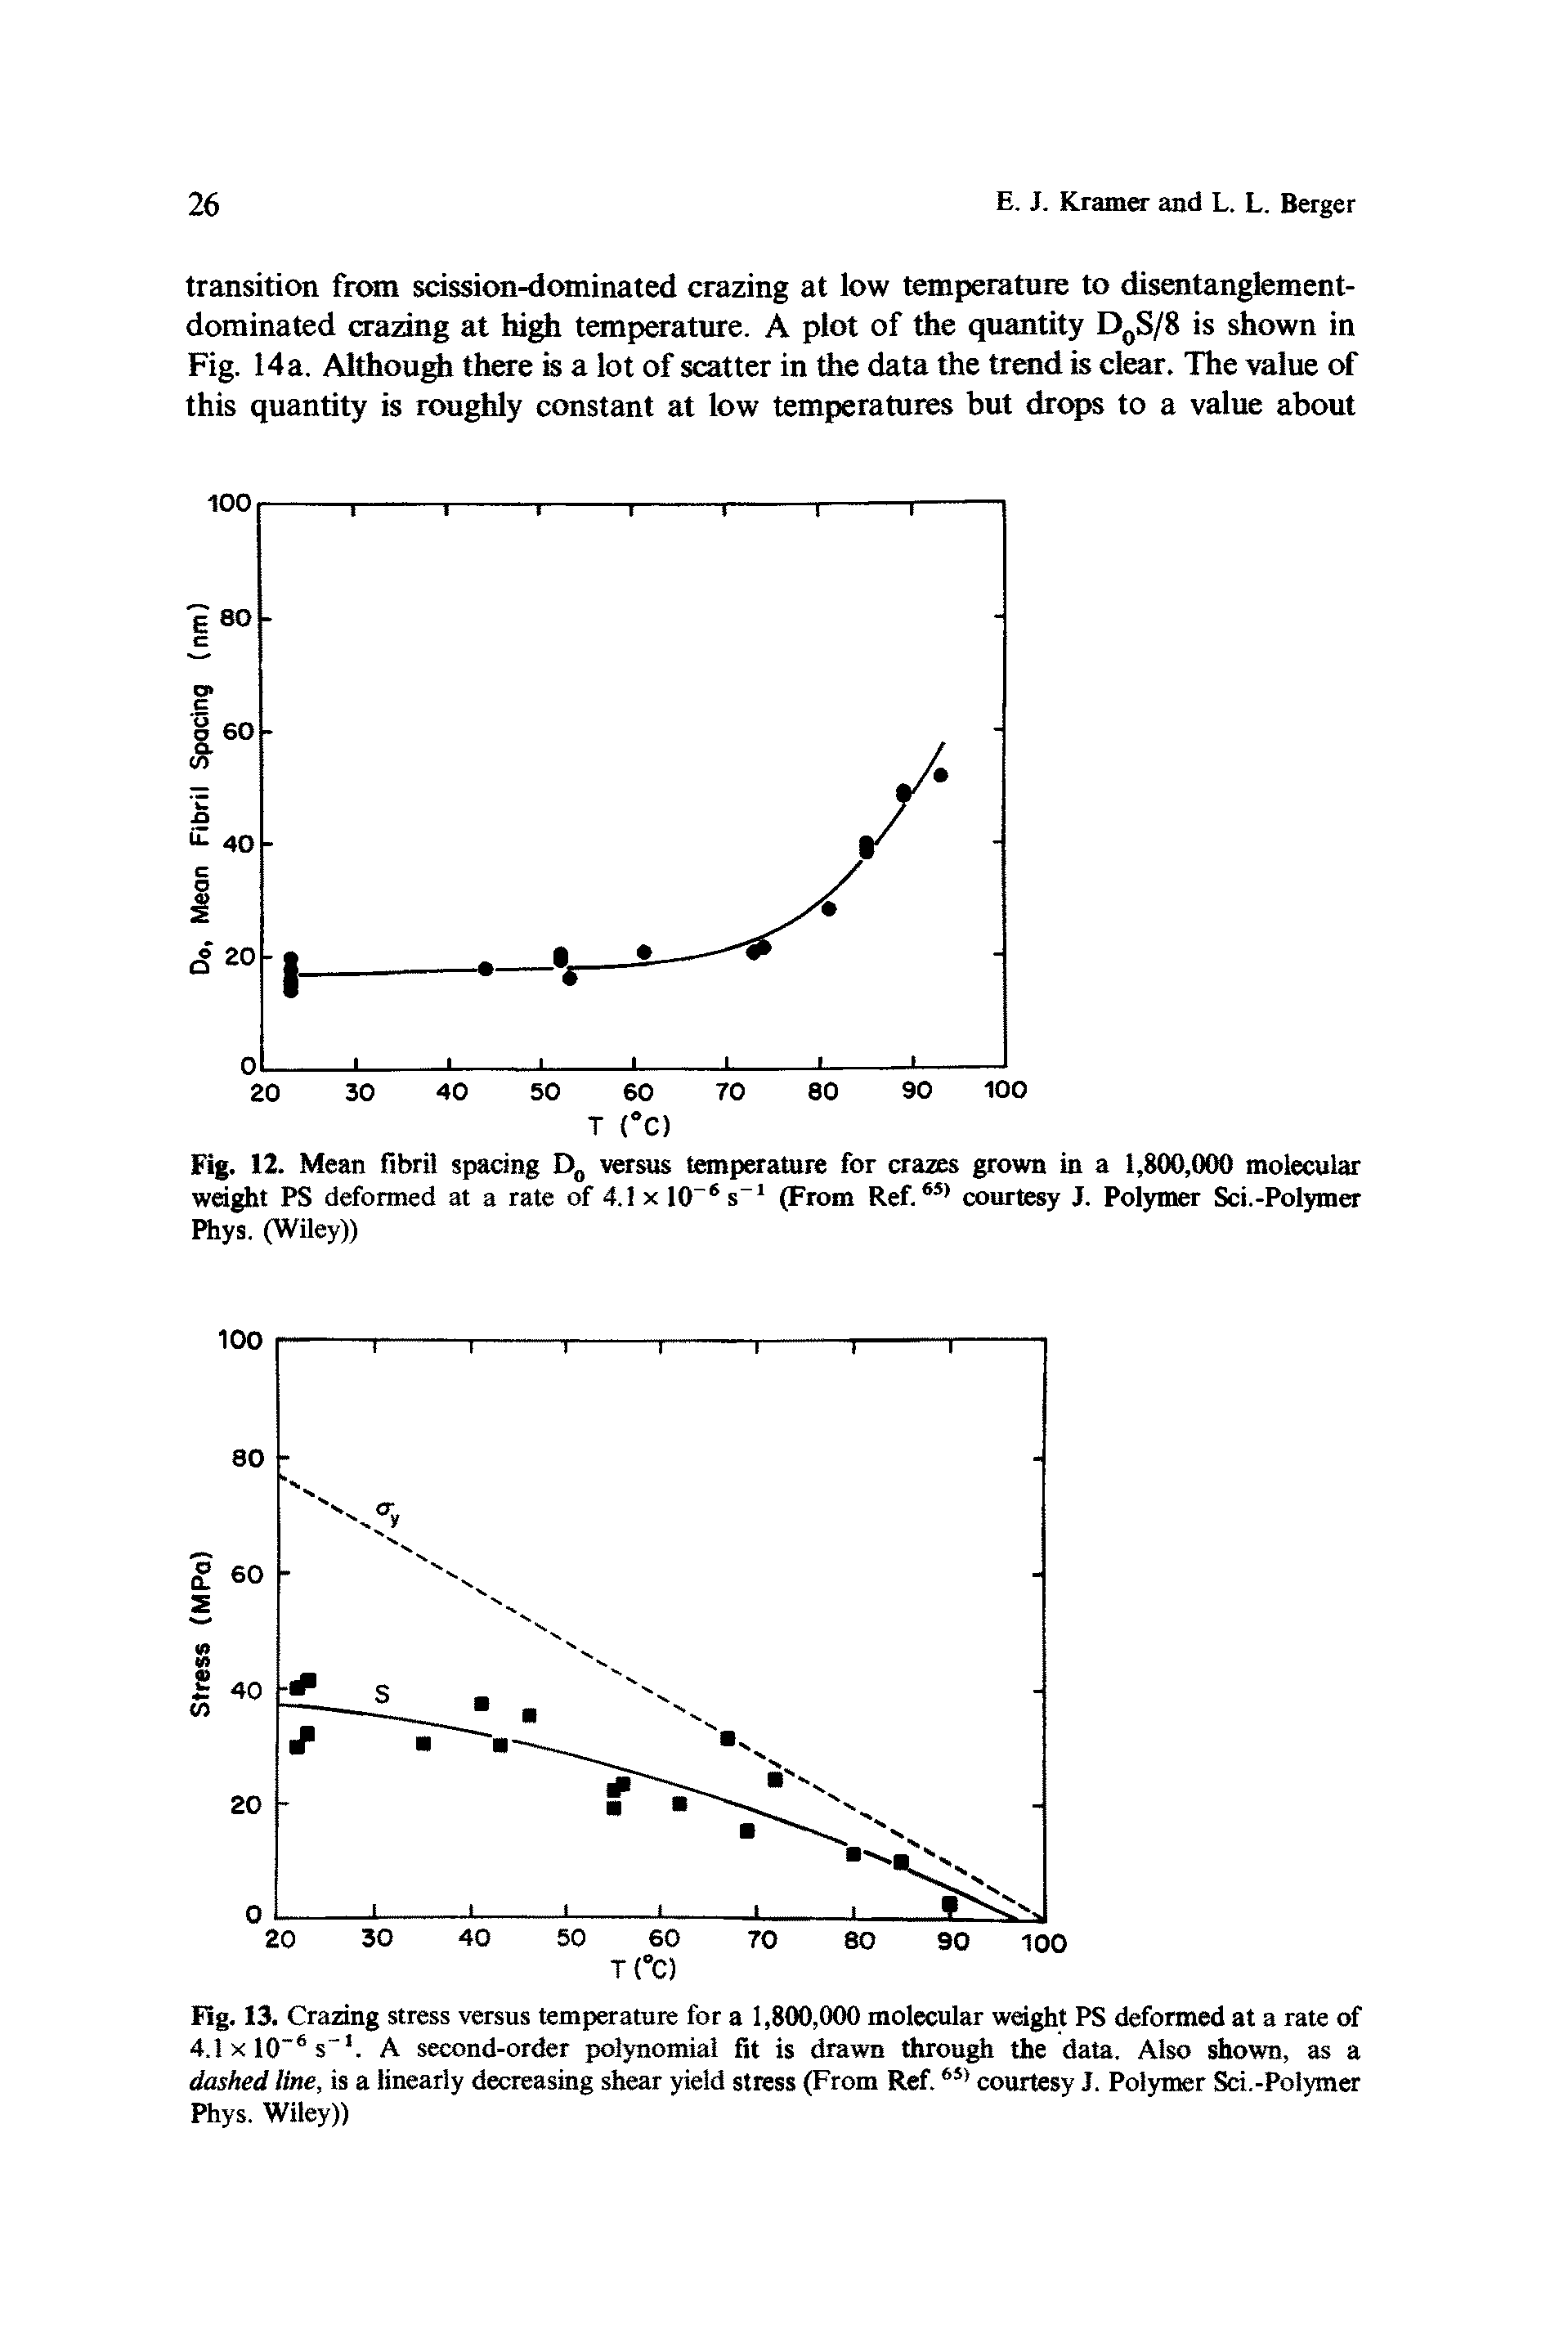 Fig. 13. Crazing stress versus temperature for a 1,800,000 molecular weight PS deformed at a rate of 4.1xl0" s . A second-order polynomial fit is drawn through the data. Also shown, as a dashed line, is a linearly decreasing shear yield stress (From Ref. courtesy J. Polymer Sci.-Polymer Phys. Wiley))...